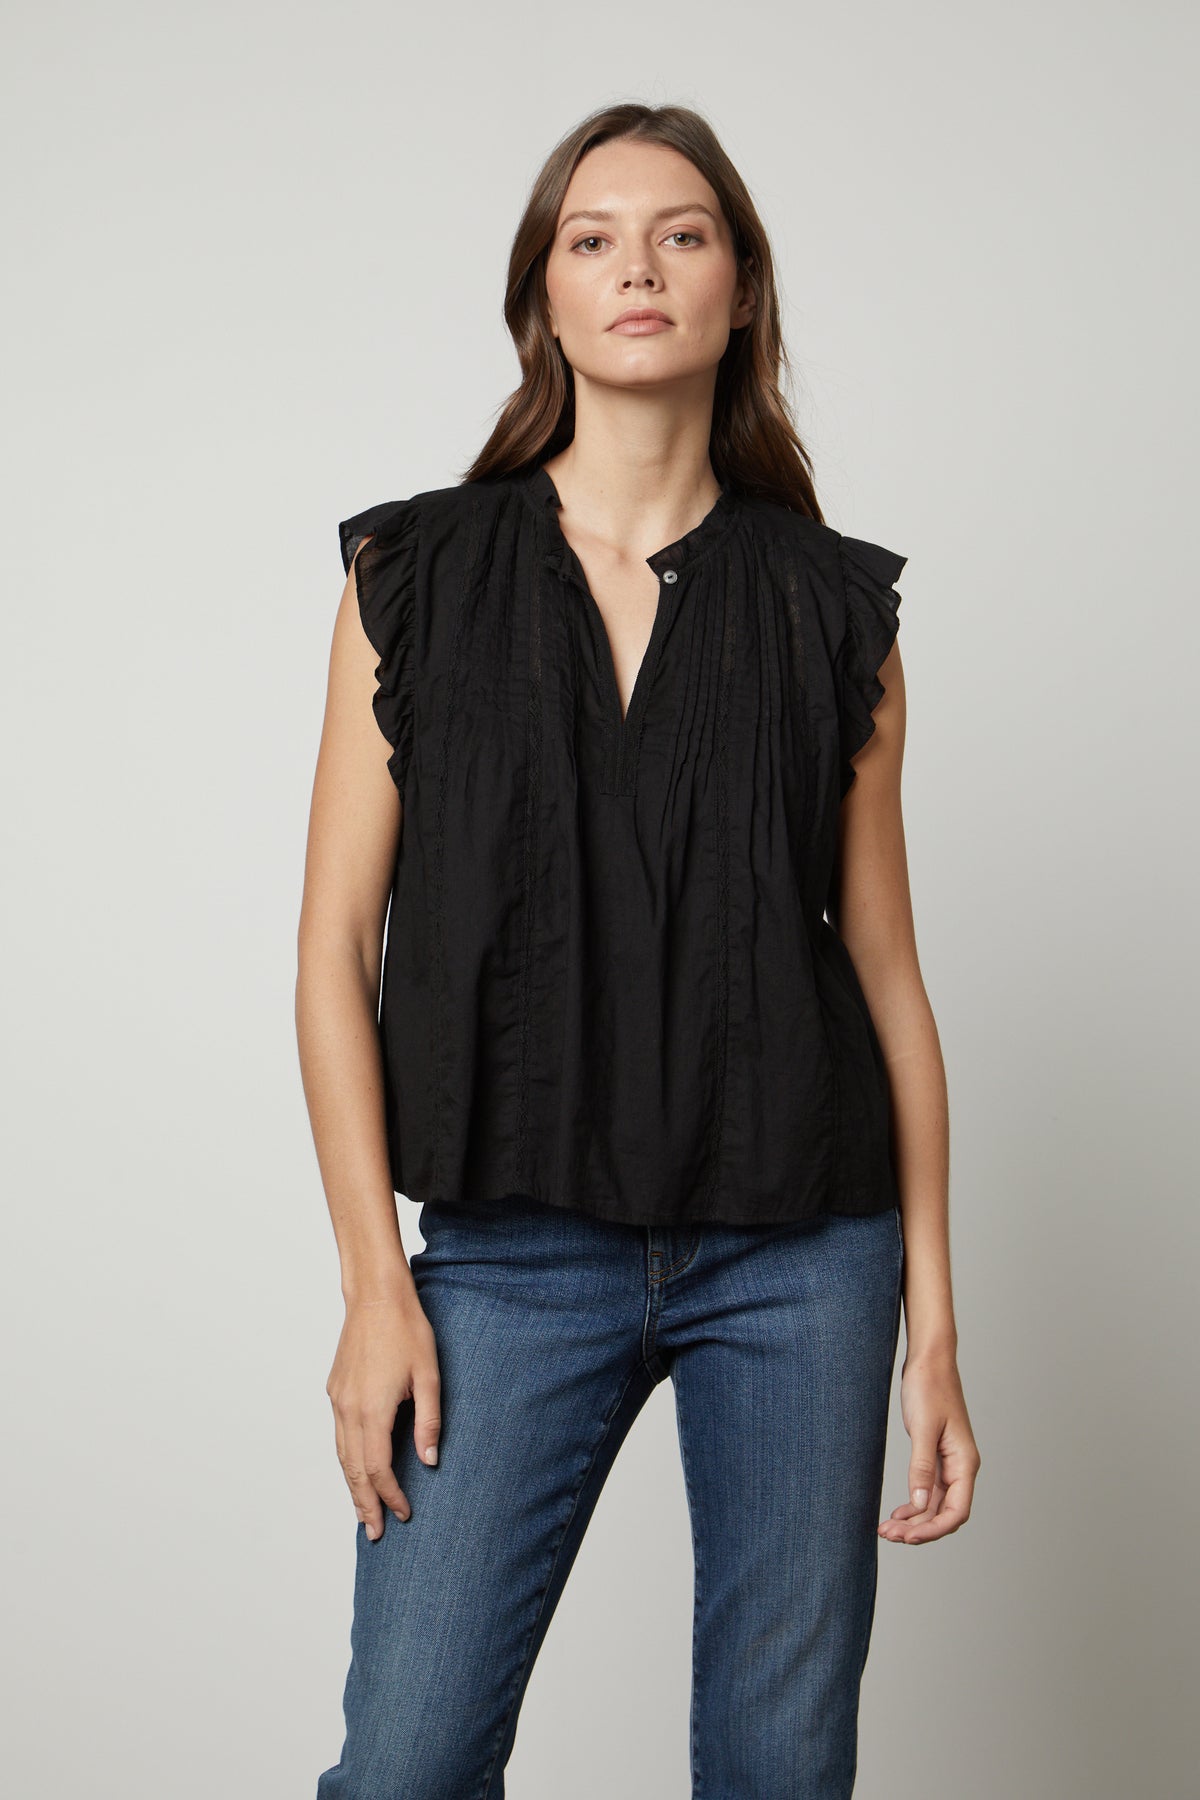 The model is wearing a LIANA LACE TANK TOP by Velvet by Graham & Spencer with ruffled sleeves.-26834989646017